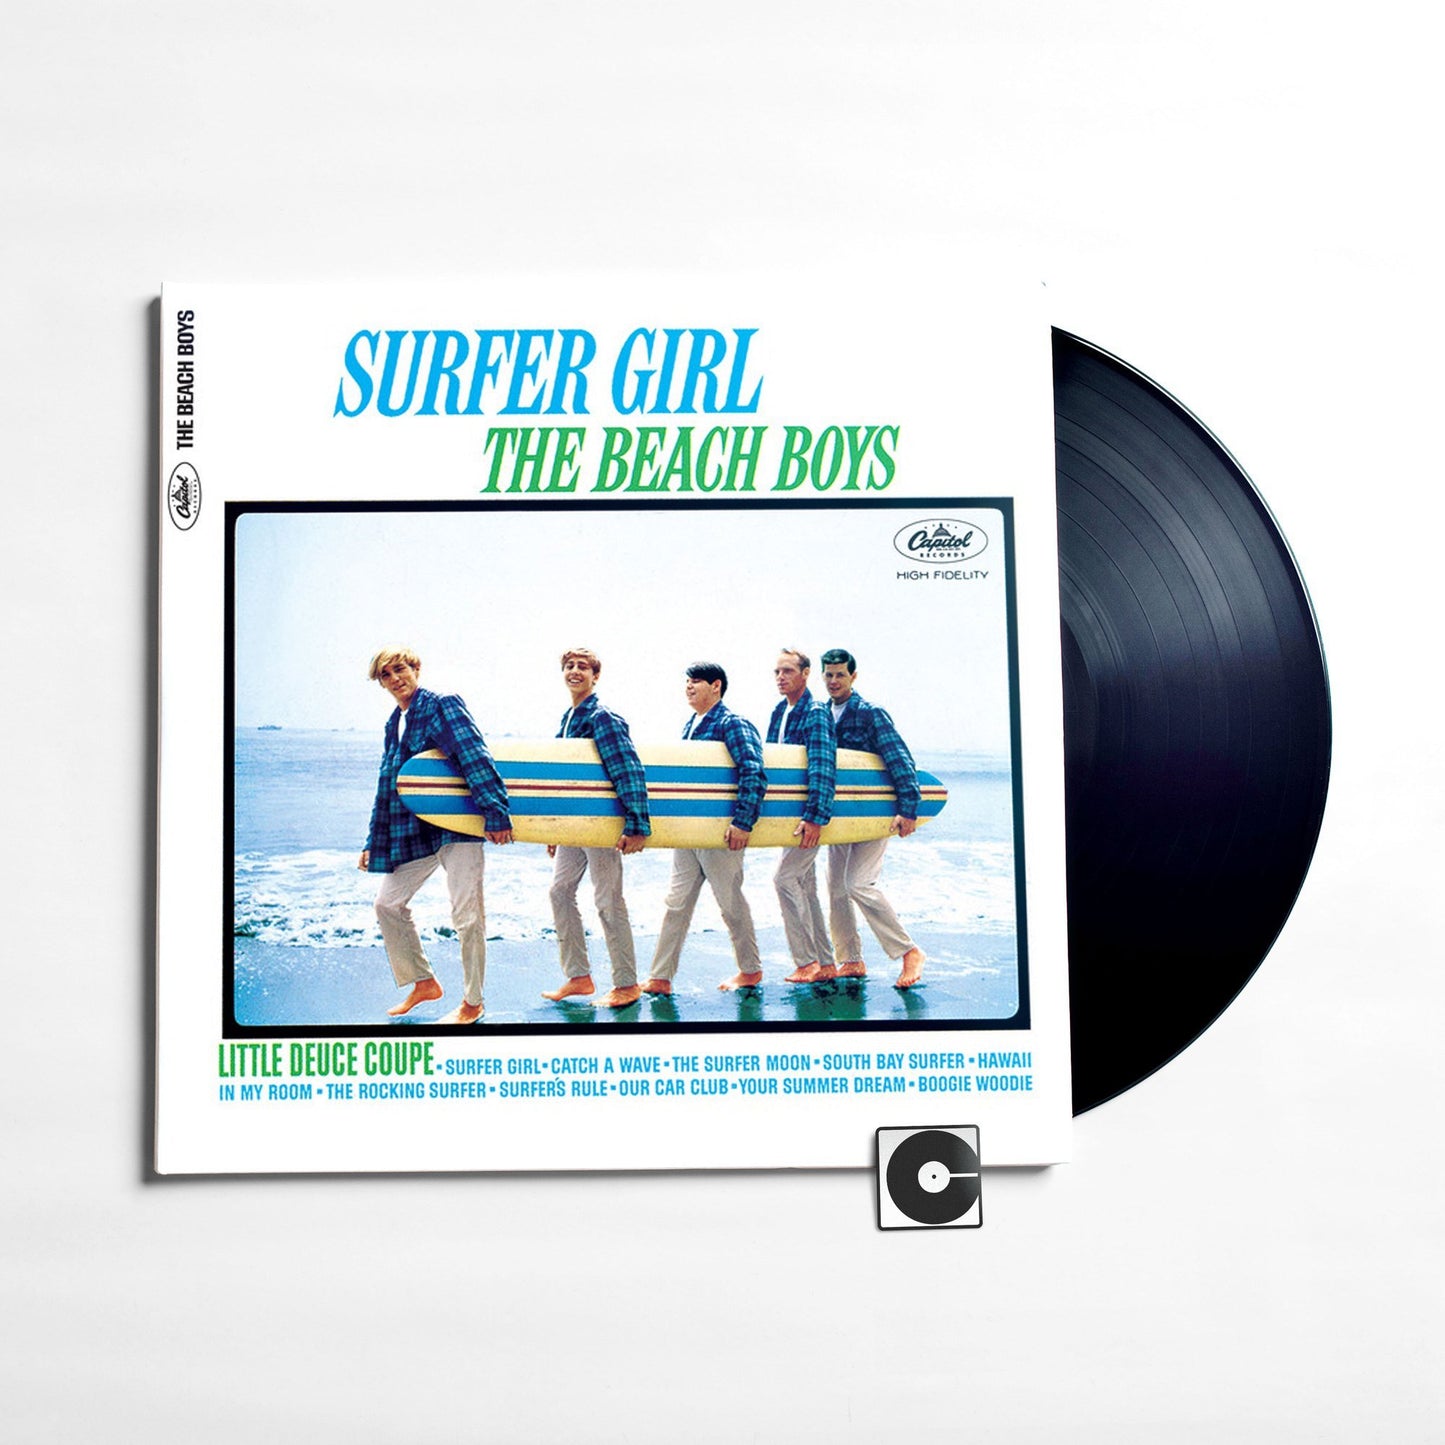 The Beach Boys - "Surfer Girl" Stereo Analogue Productions